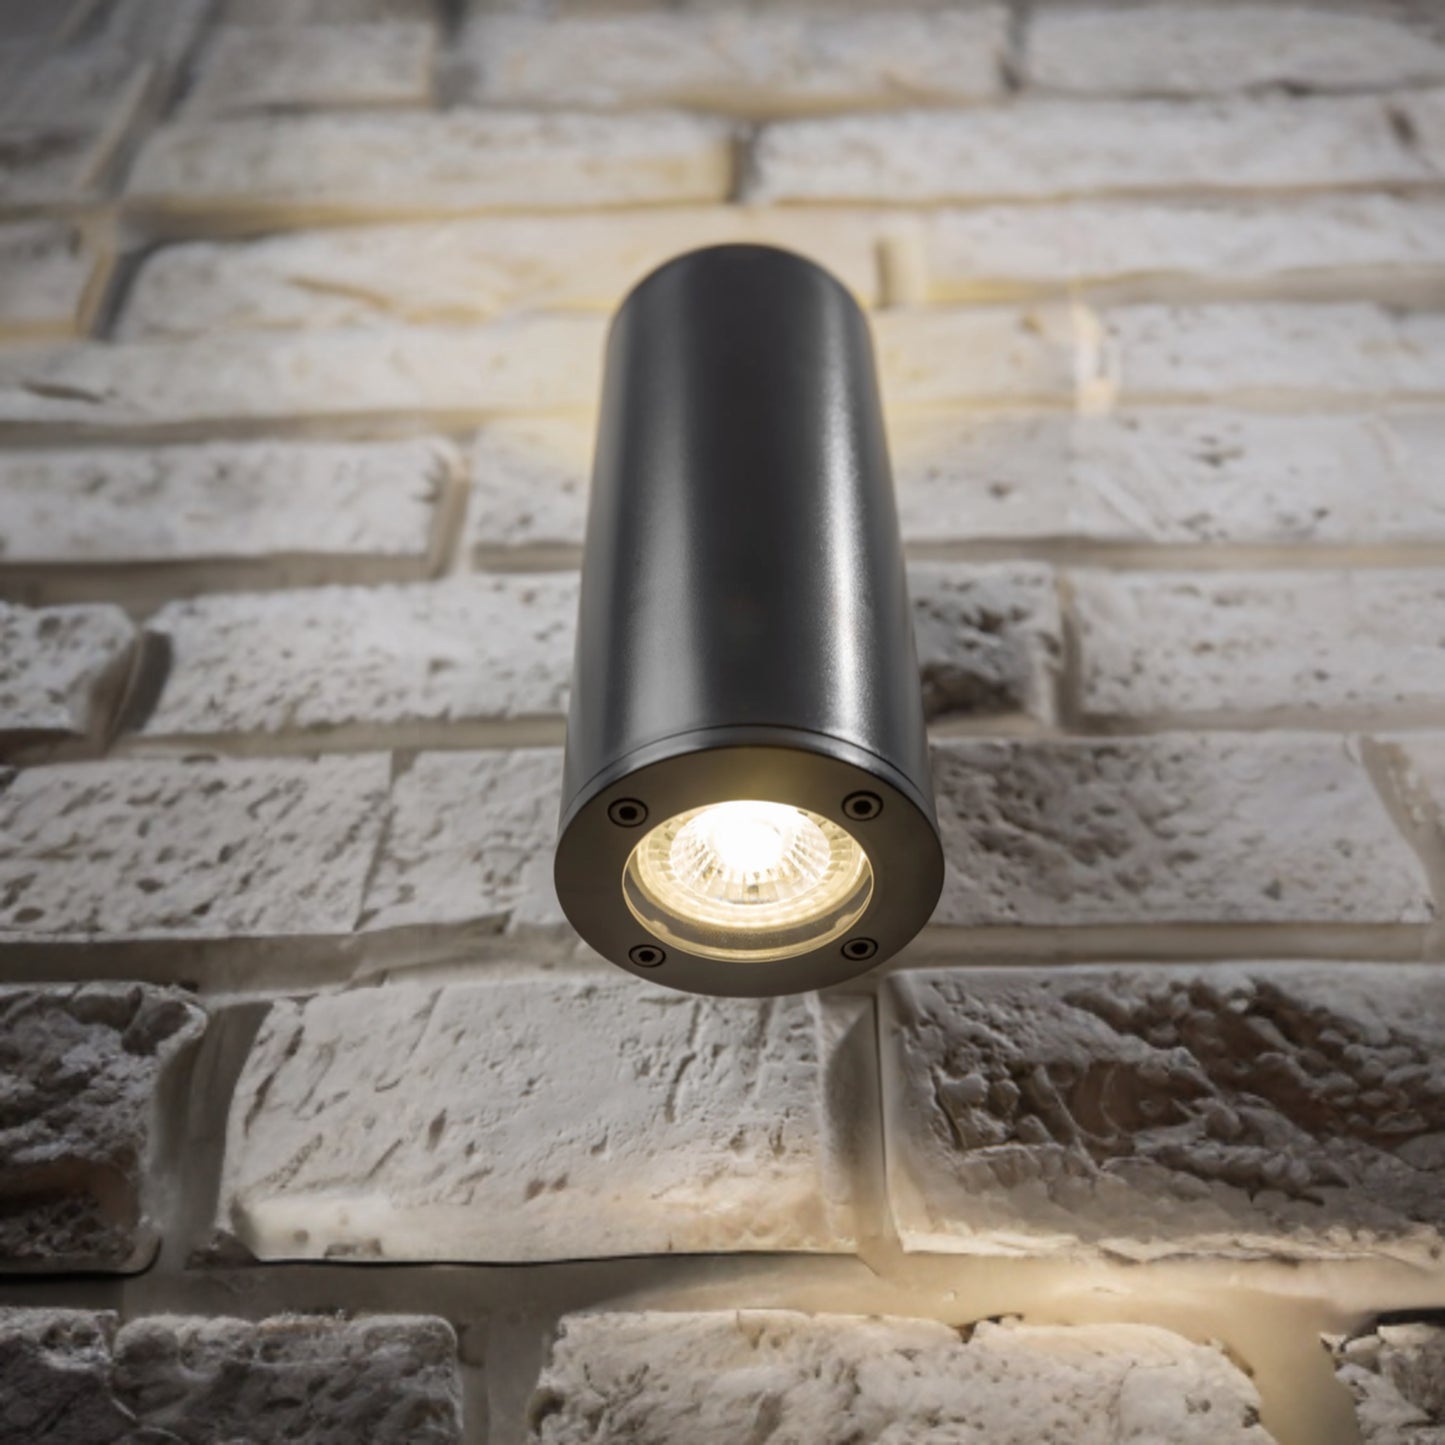 Our Sherri dark grey cylinder up and down wall light would look perfect in a modern or more traditional home design. Outside lights can provide atmospheric light in your garden, at the front door or on the terrace as well as a great security solution. It is designed for durability and longevity with its robust material producing a fully weatherproof and water resistant light fitting